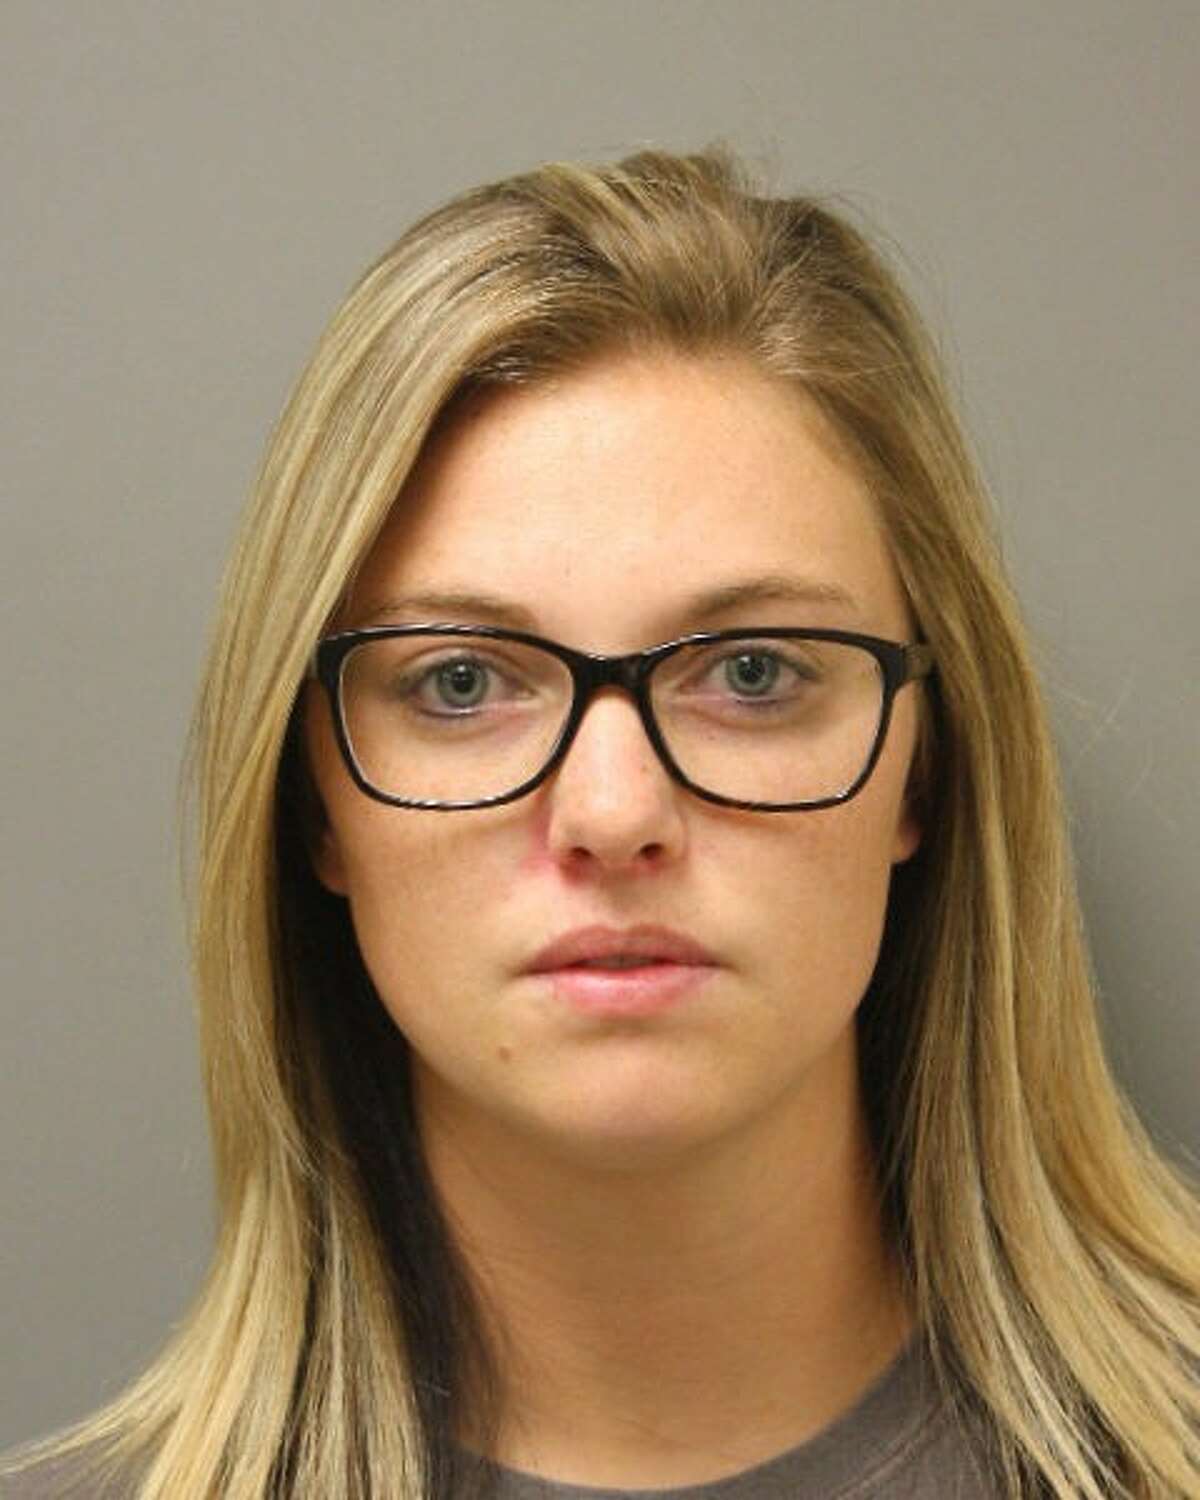 Former teacher Ashley Zehnder, 24, is accused of engaging in an improper relationship with a student at Pasadena High School. (Pasadena Independent School District)